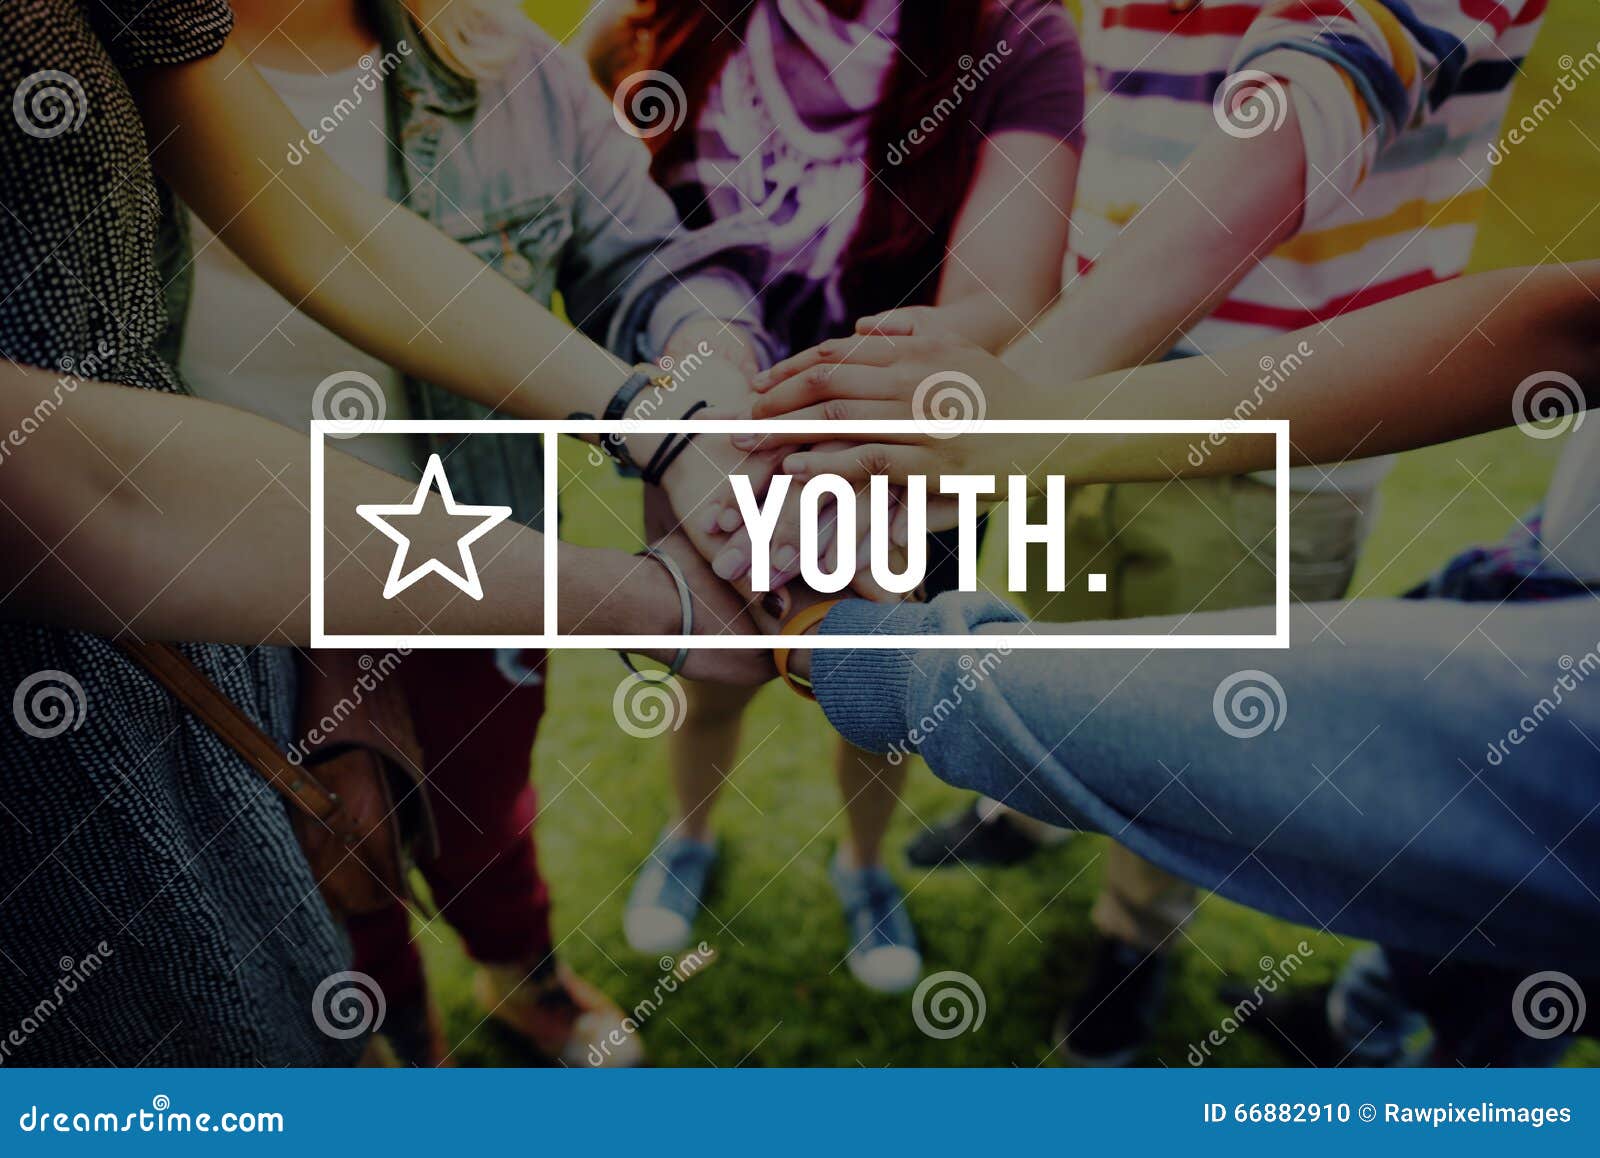 youth young teens generation adolescence concept